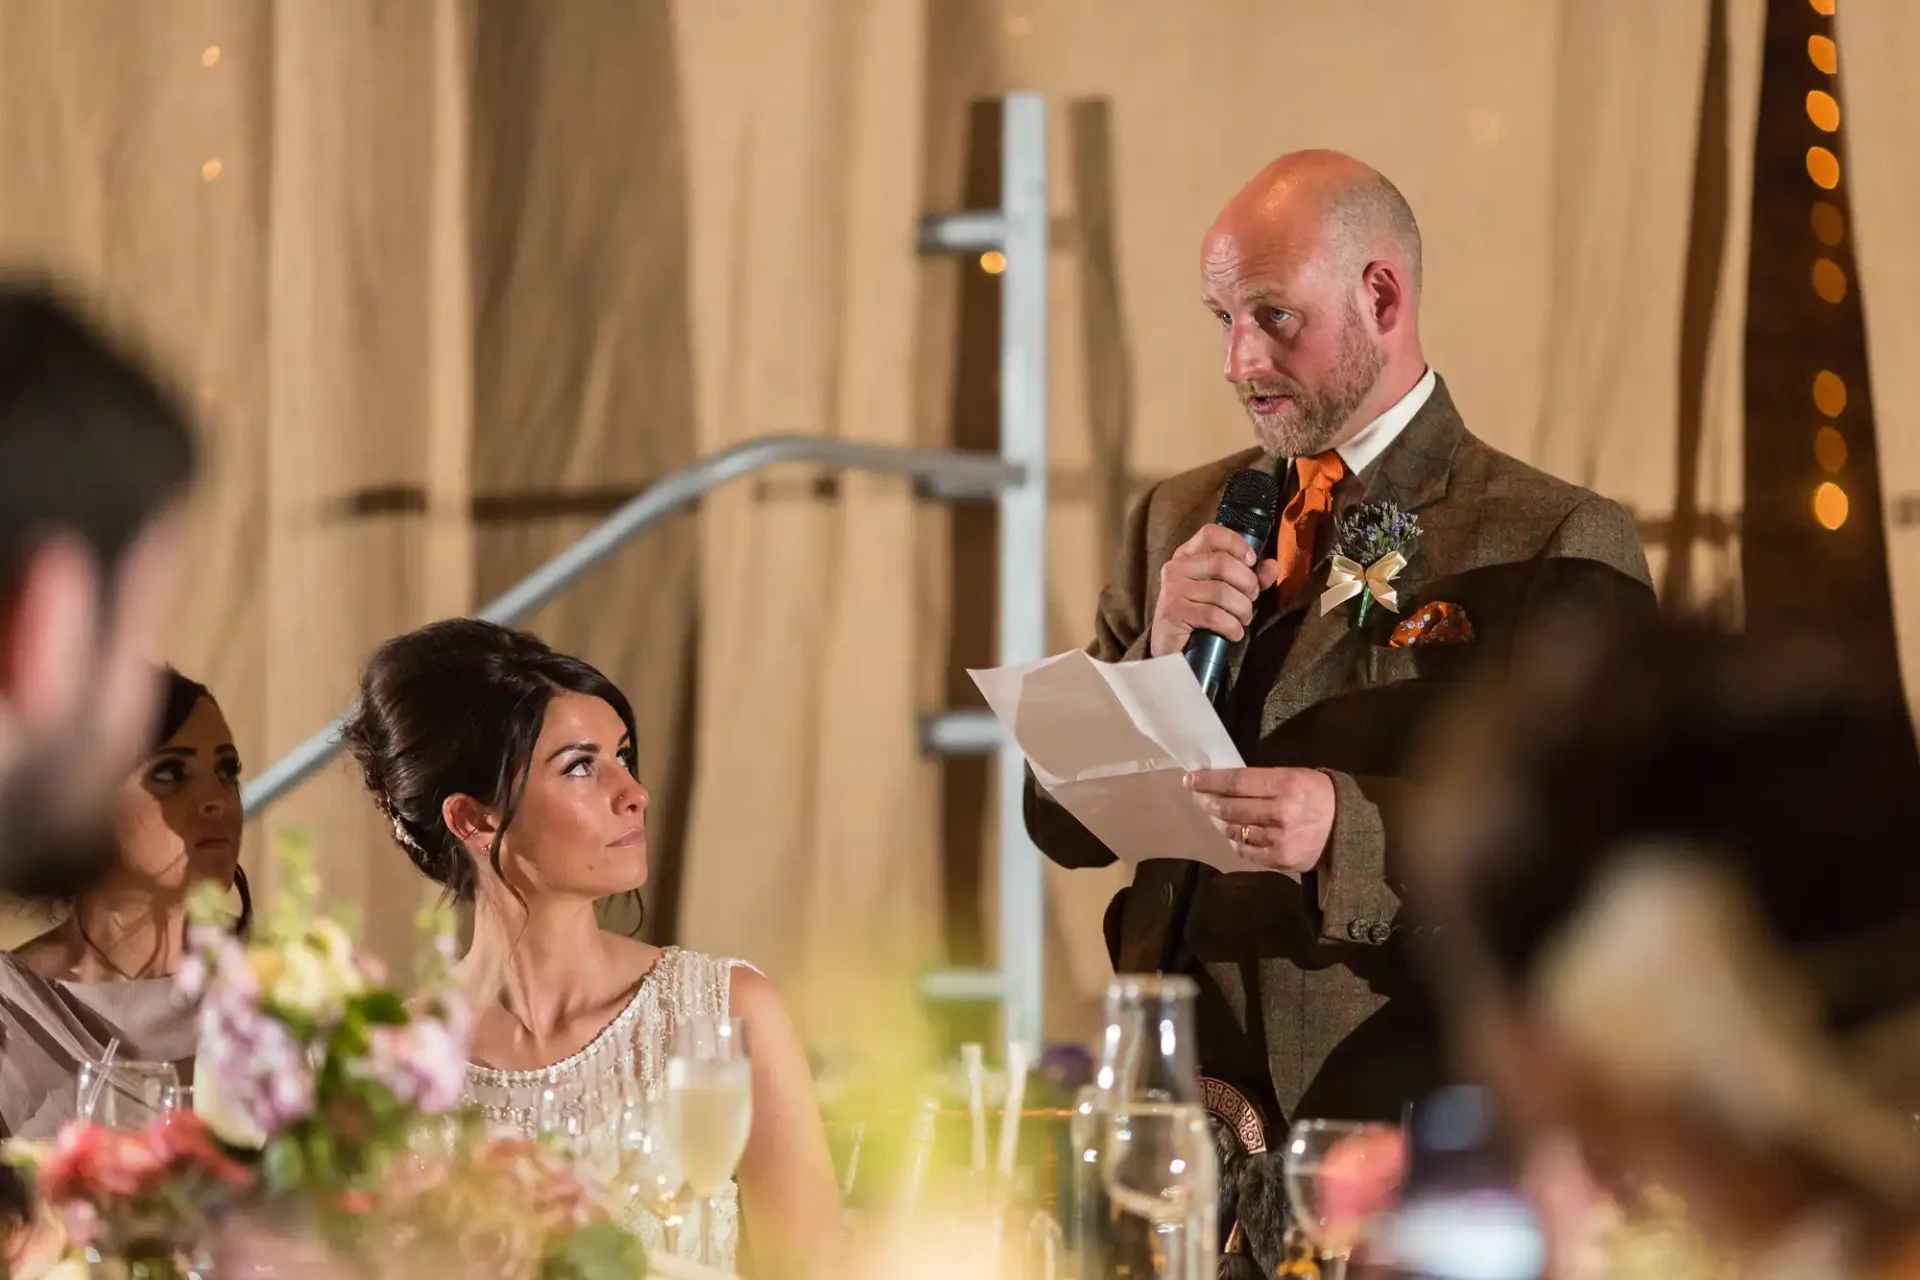 Bald man in a tweed suit delivers a speech with a microphone at a wedding reception, reading from a paper, with a focused woman in the foreground.